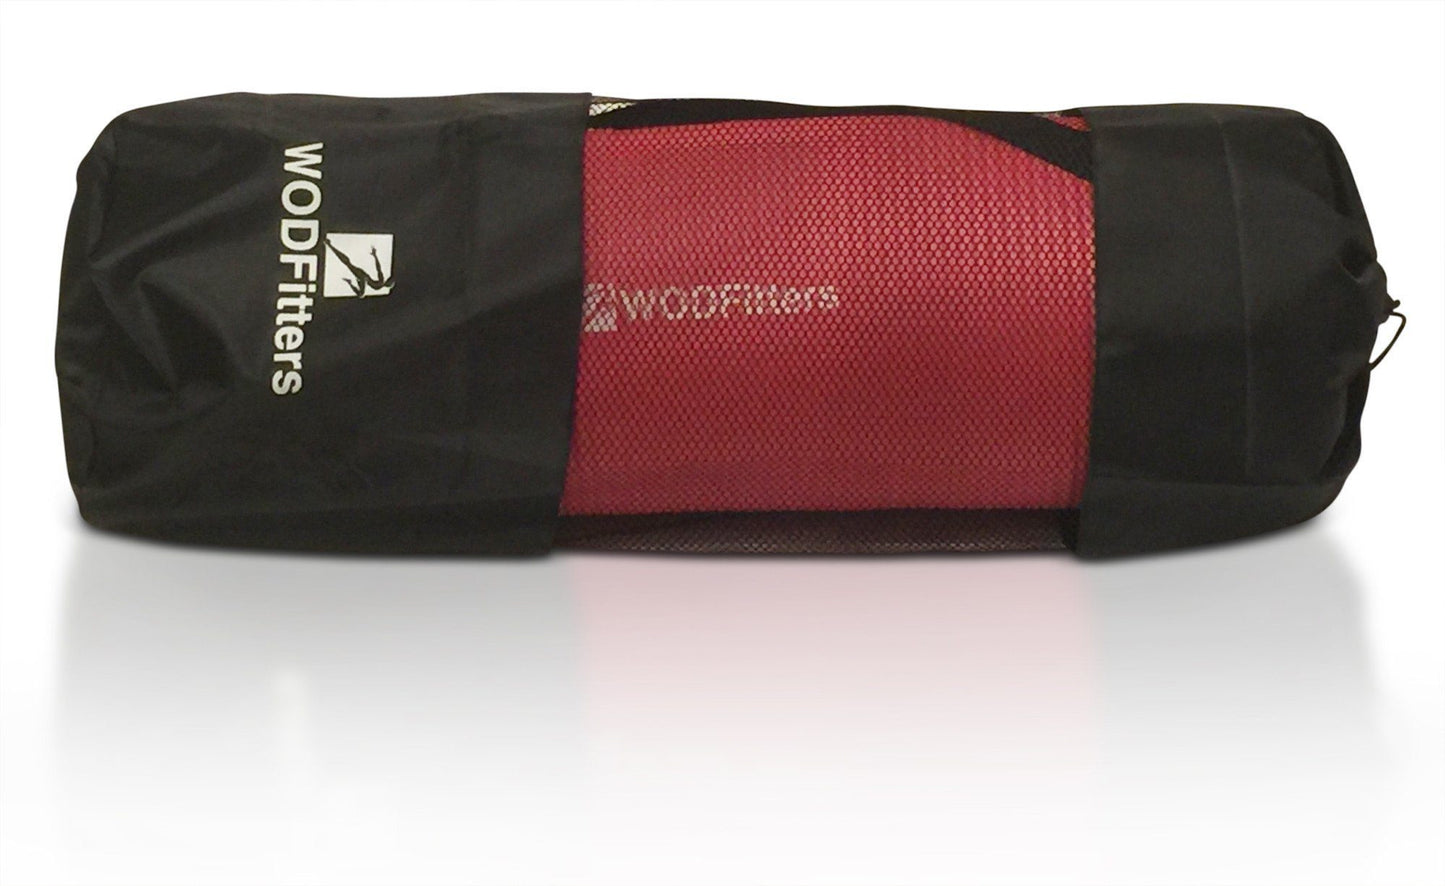 WODFitters NBR Workout Mat - Extra Thick for Ultimate Comfort - with Carrying Strap and Bonus Carrying Bag 